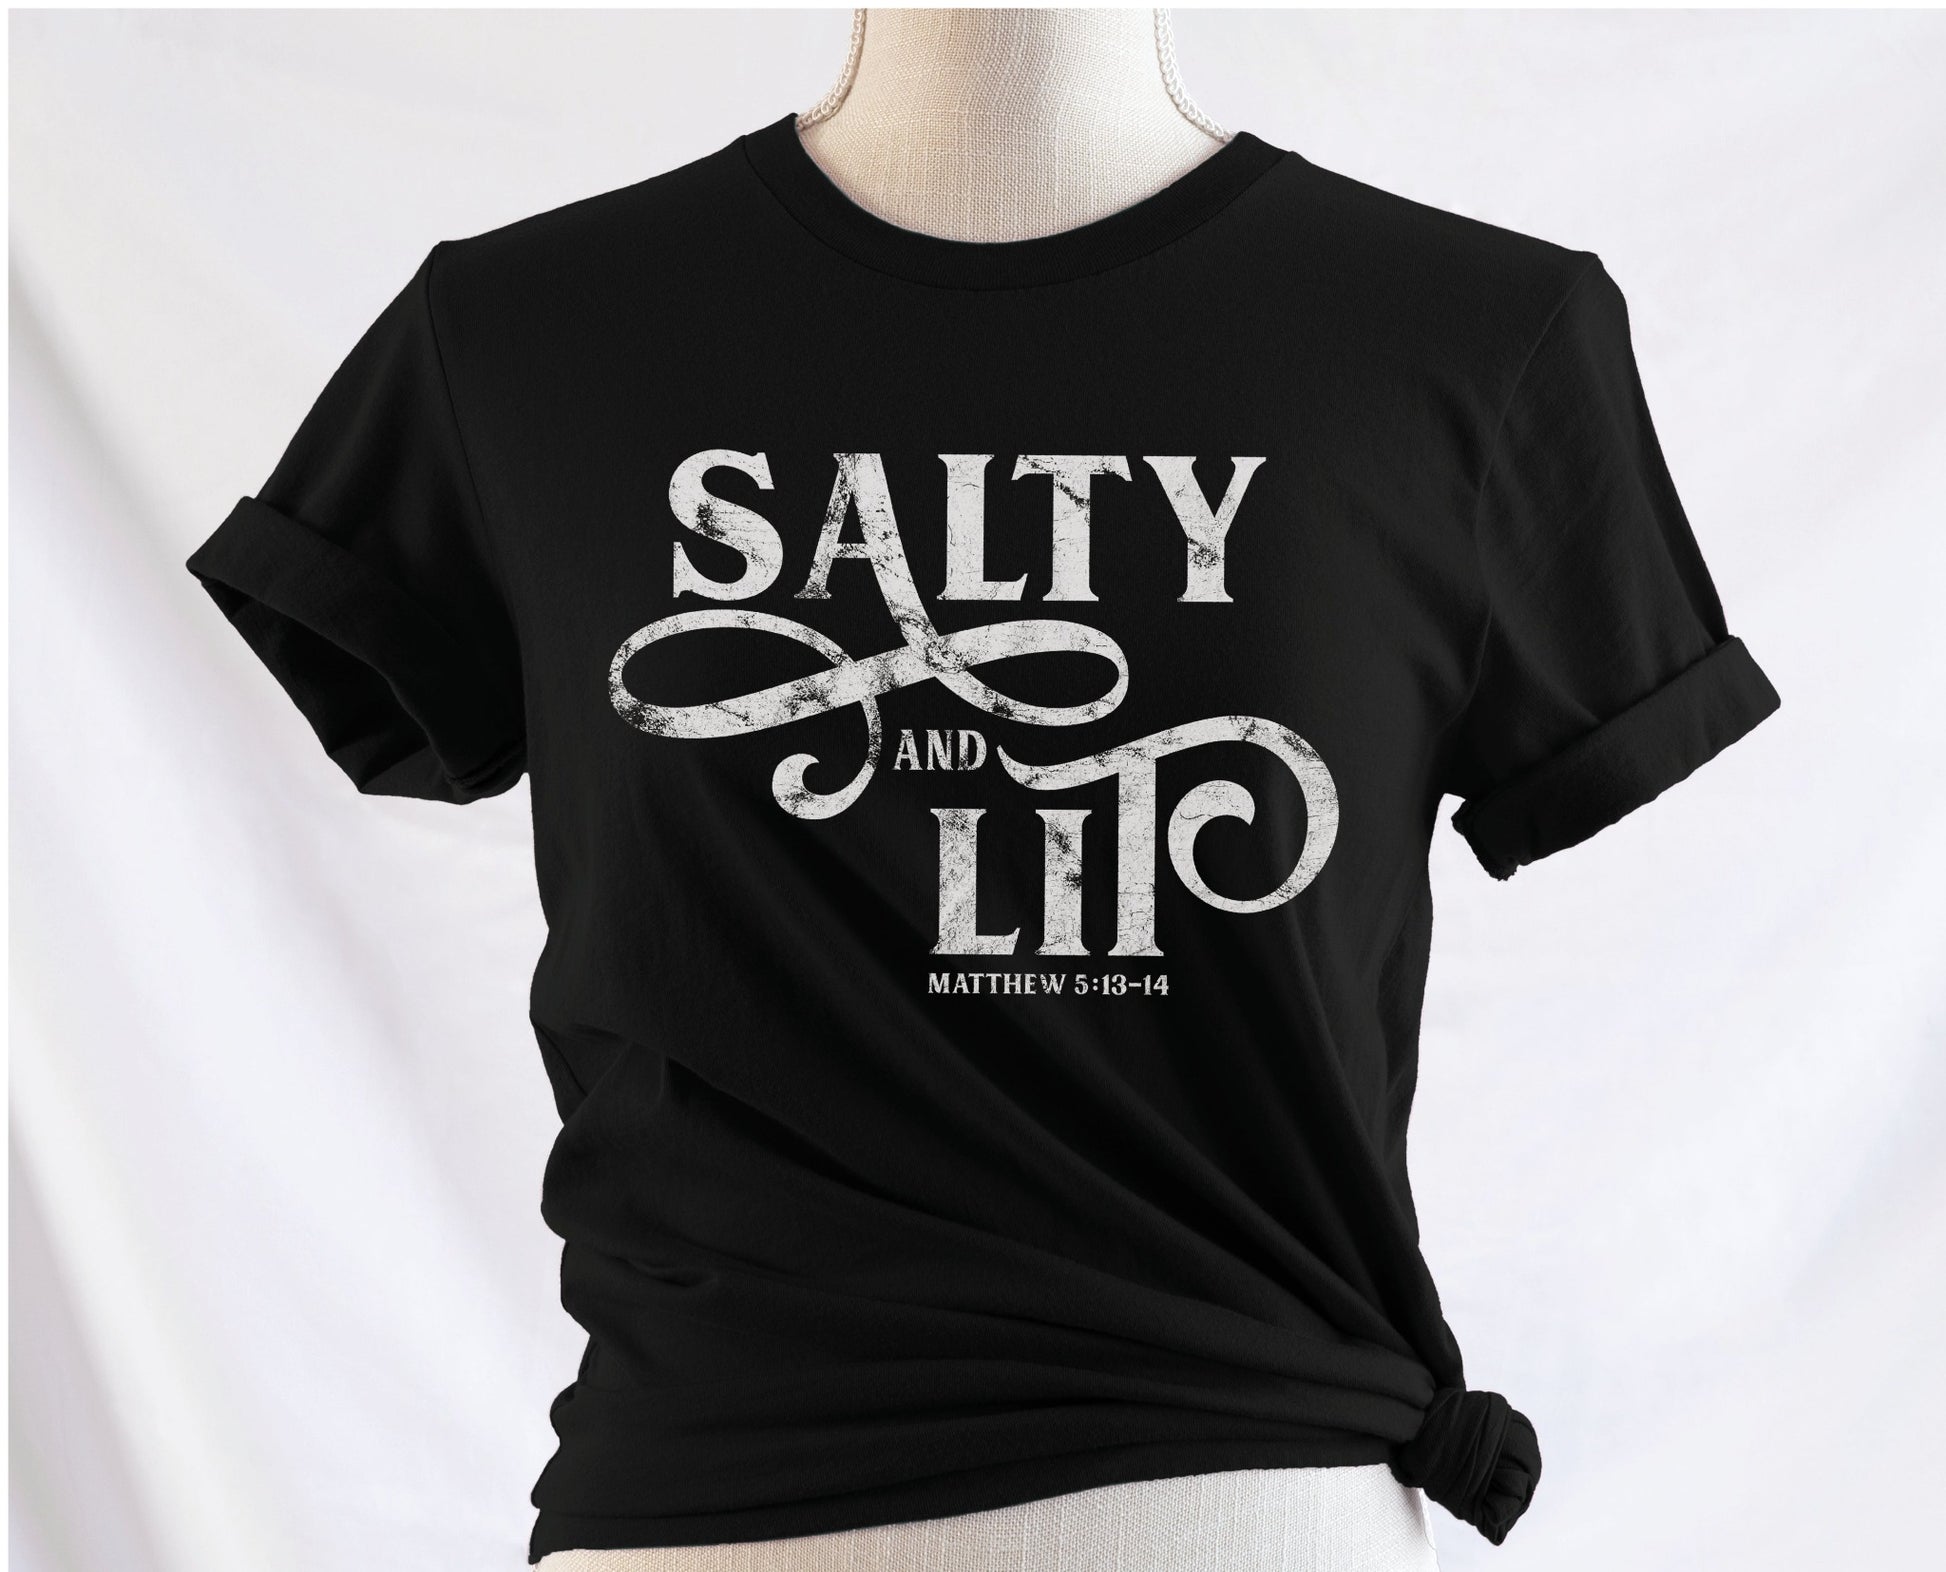 Salty And Lit Matthew 5:13-14 bible verse funny Christian T-Shirt design printed in white on soft black tee for women